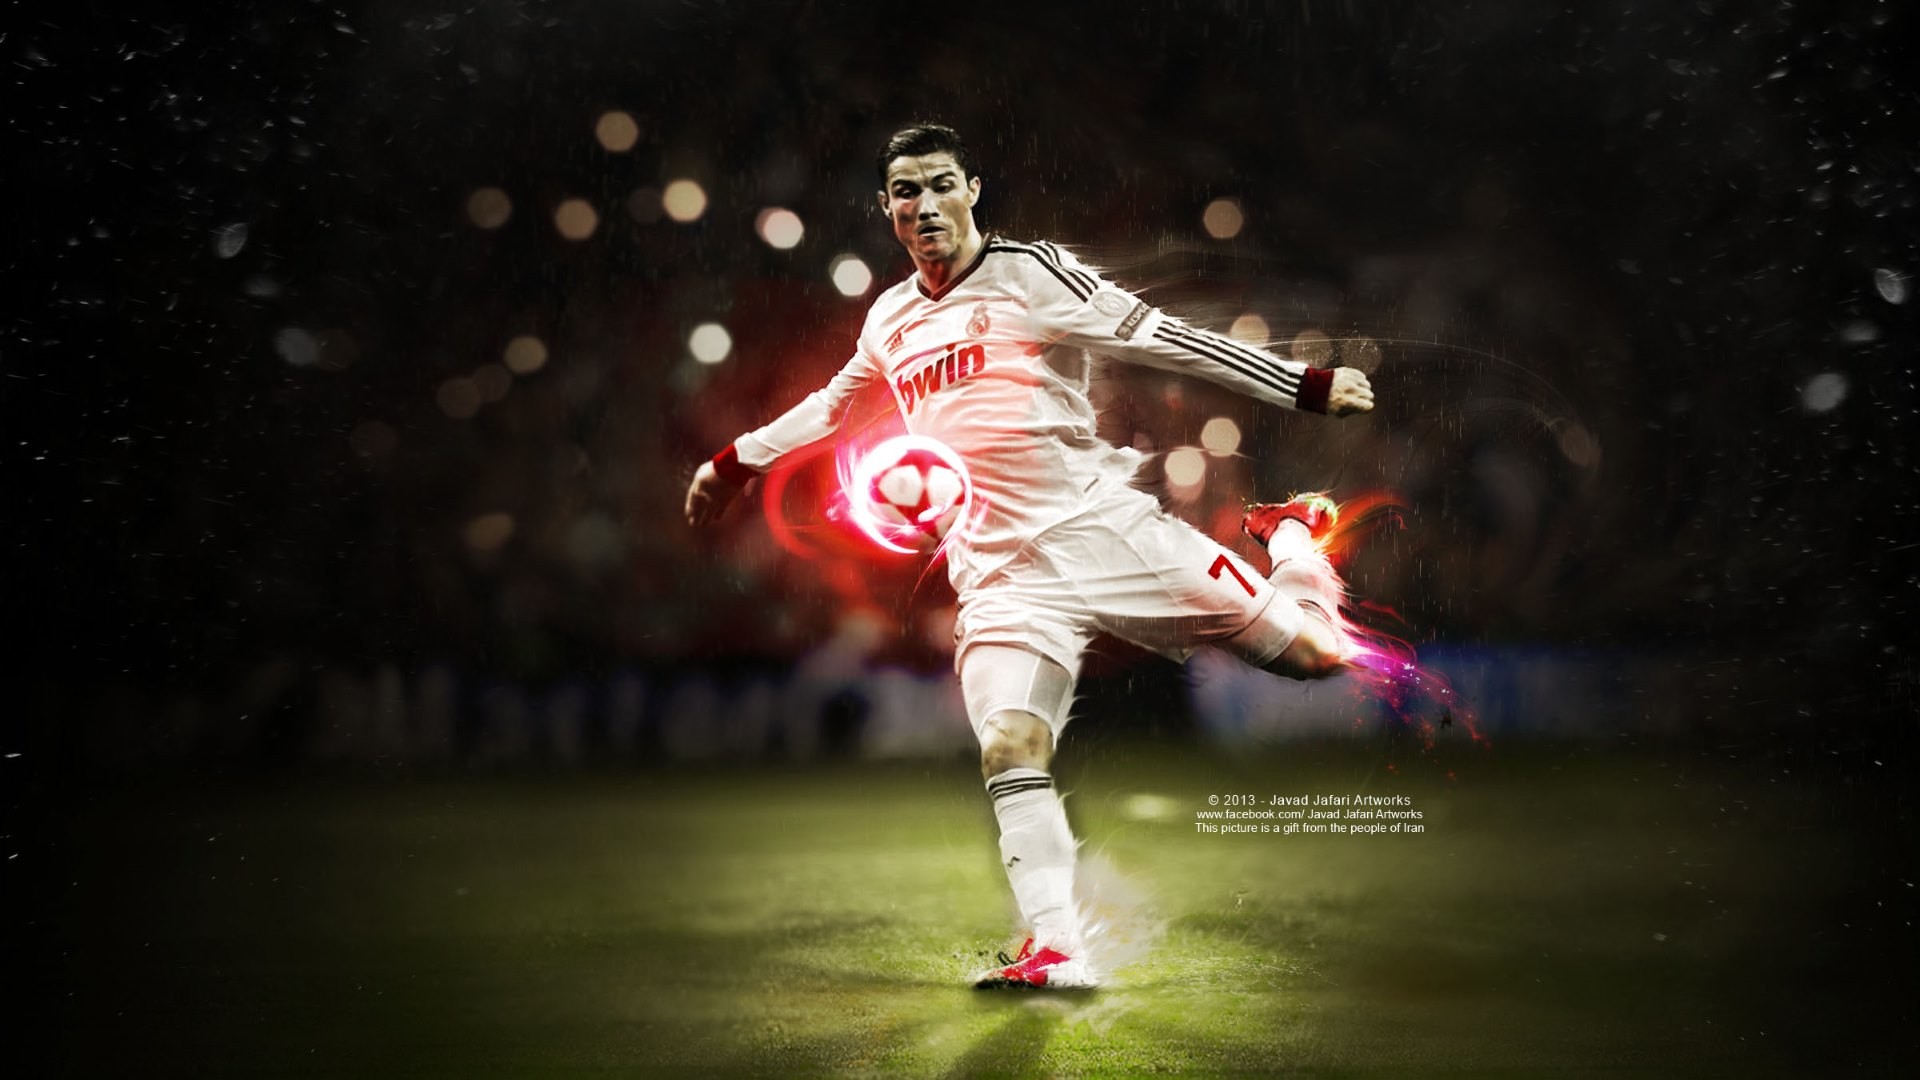 1920x1080 Cristiano Ronaldo Wallpapers Pictures Images